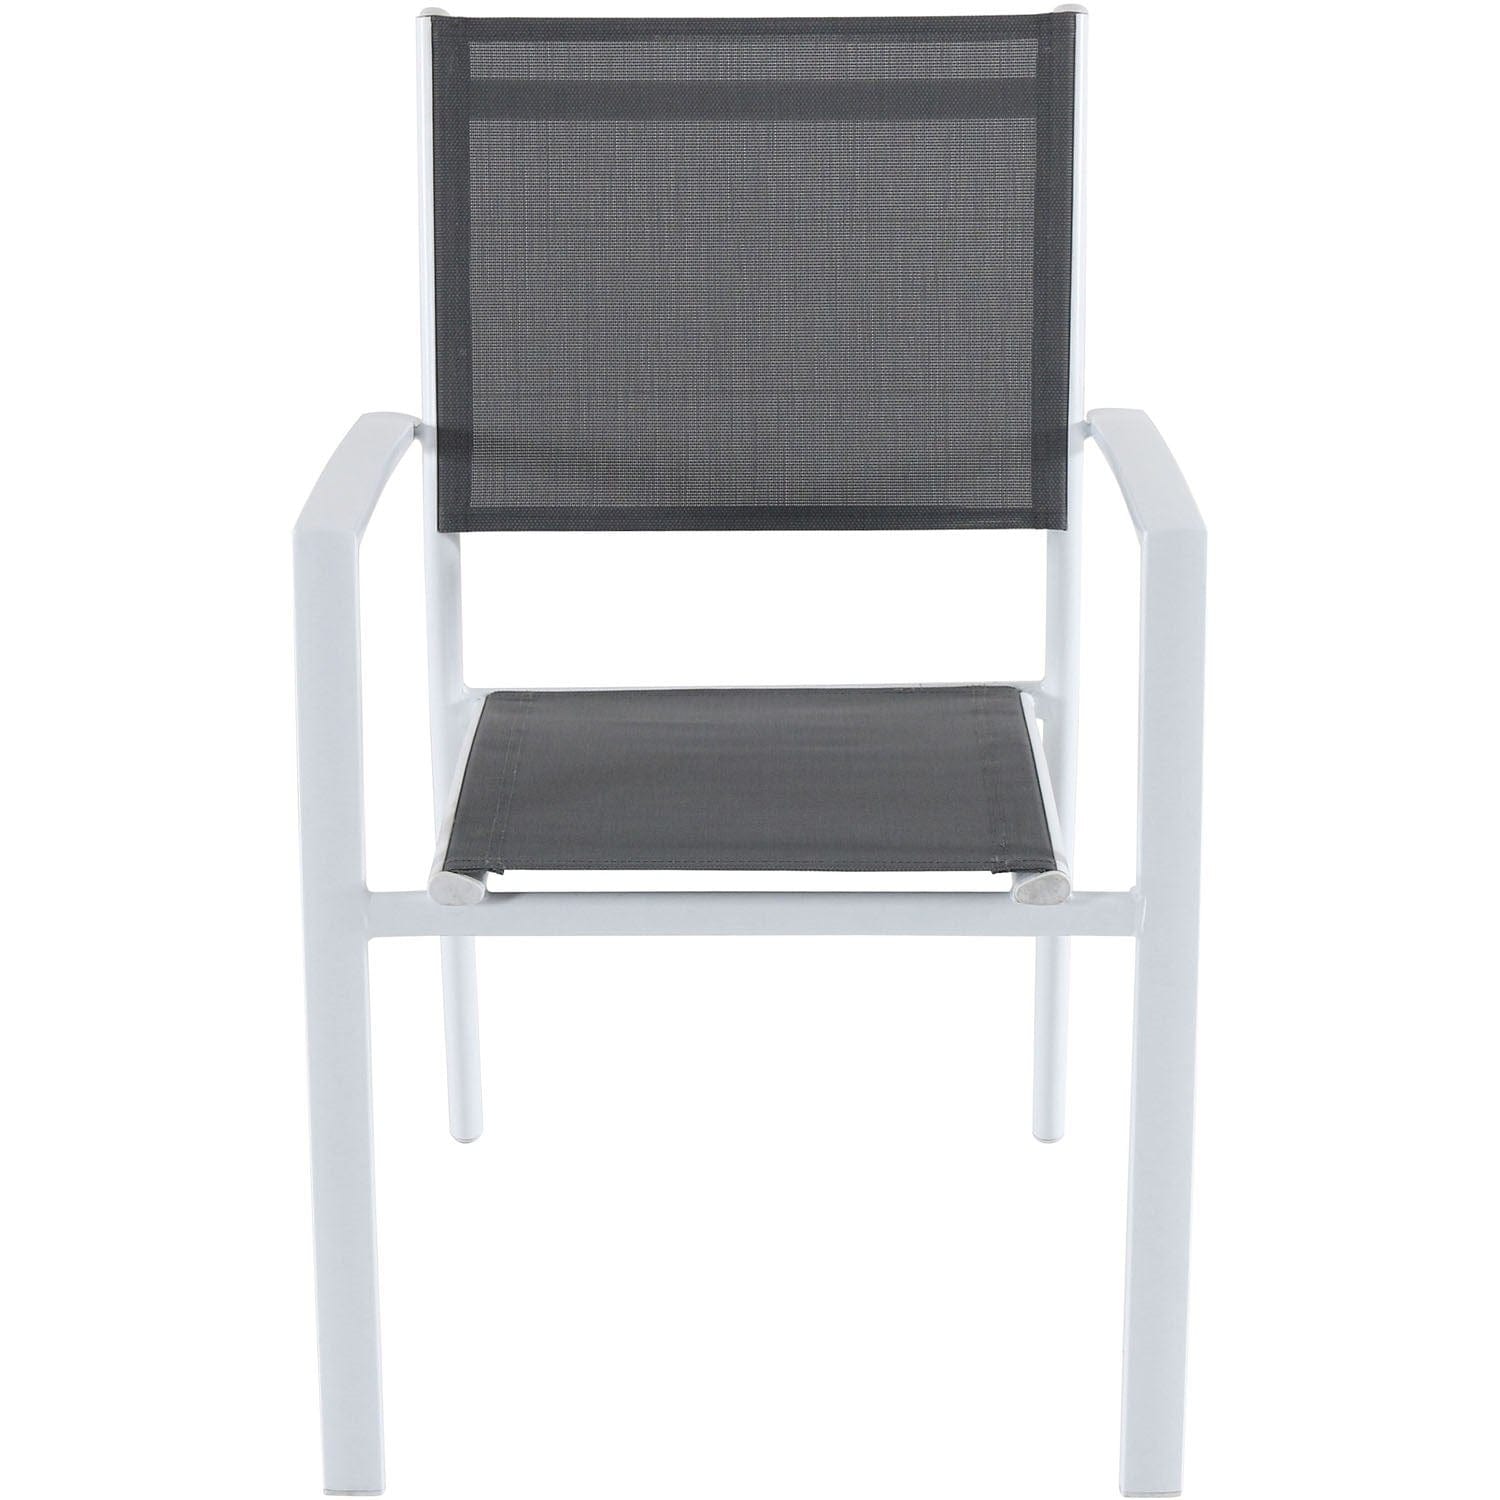 Hanover Outdoor Dining Set Hanover- Del Mar 7 Piece Outdoor Dining Set with 6 Sling Chairs in Gray/White and a 40" x 118" Expandable Dining Table | DELDN7PC-WW